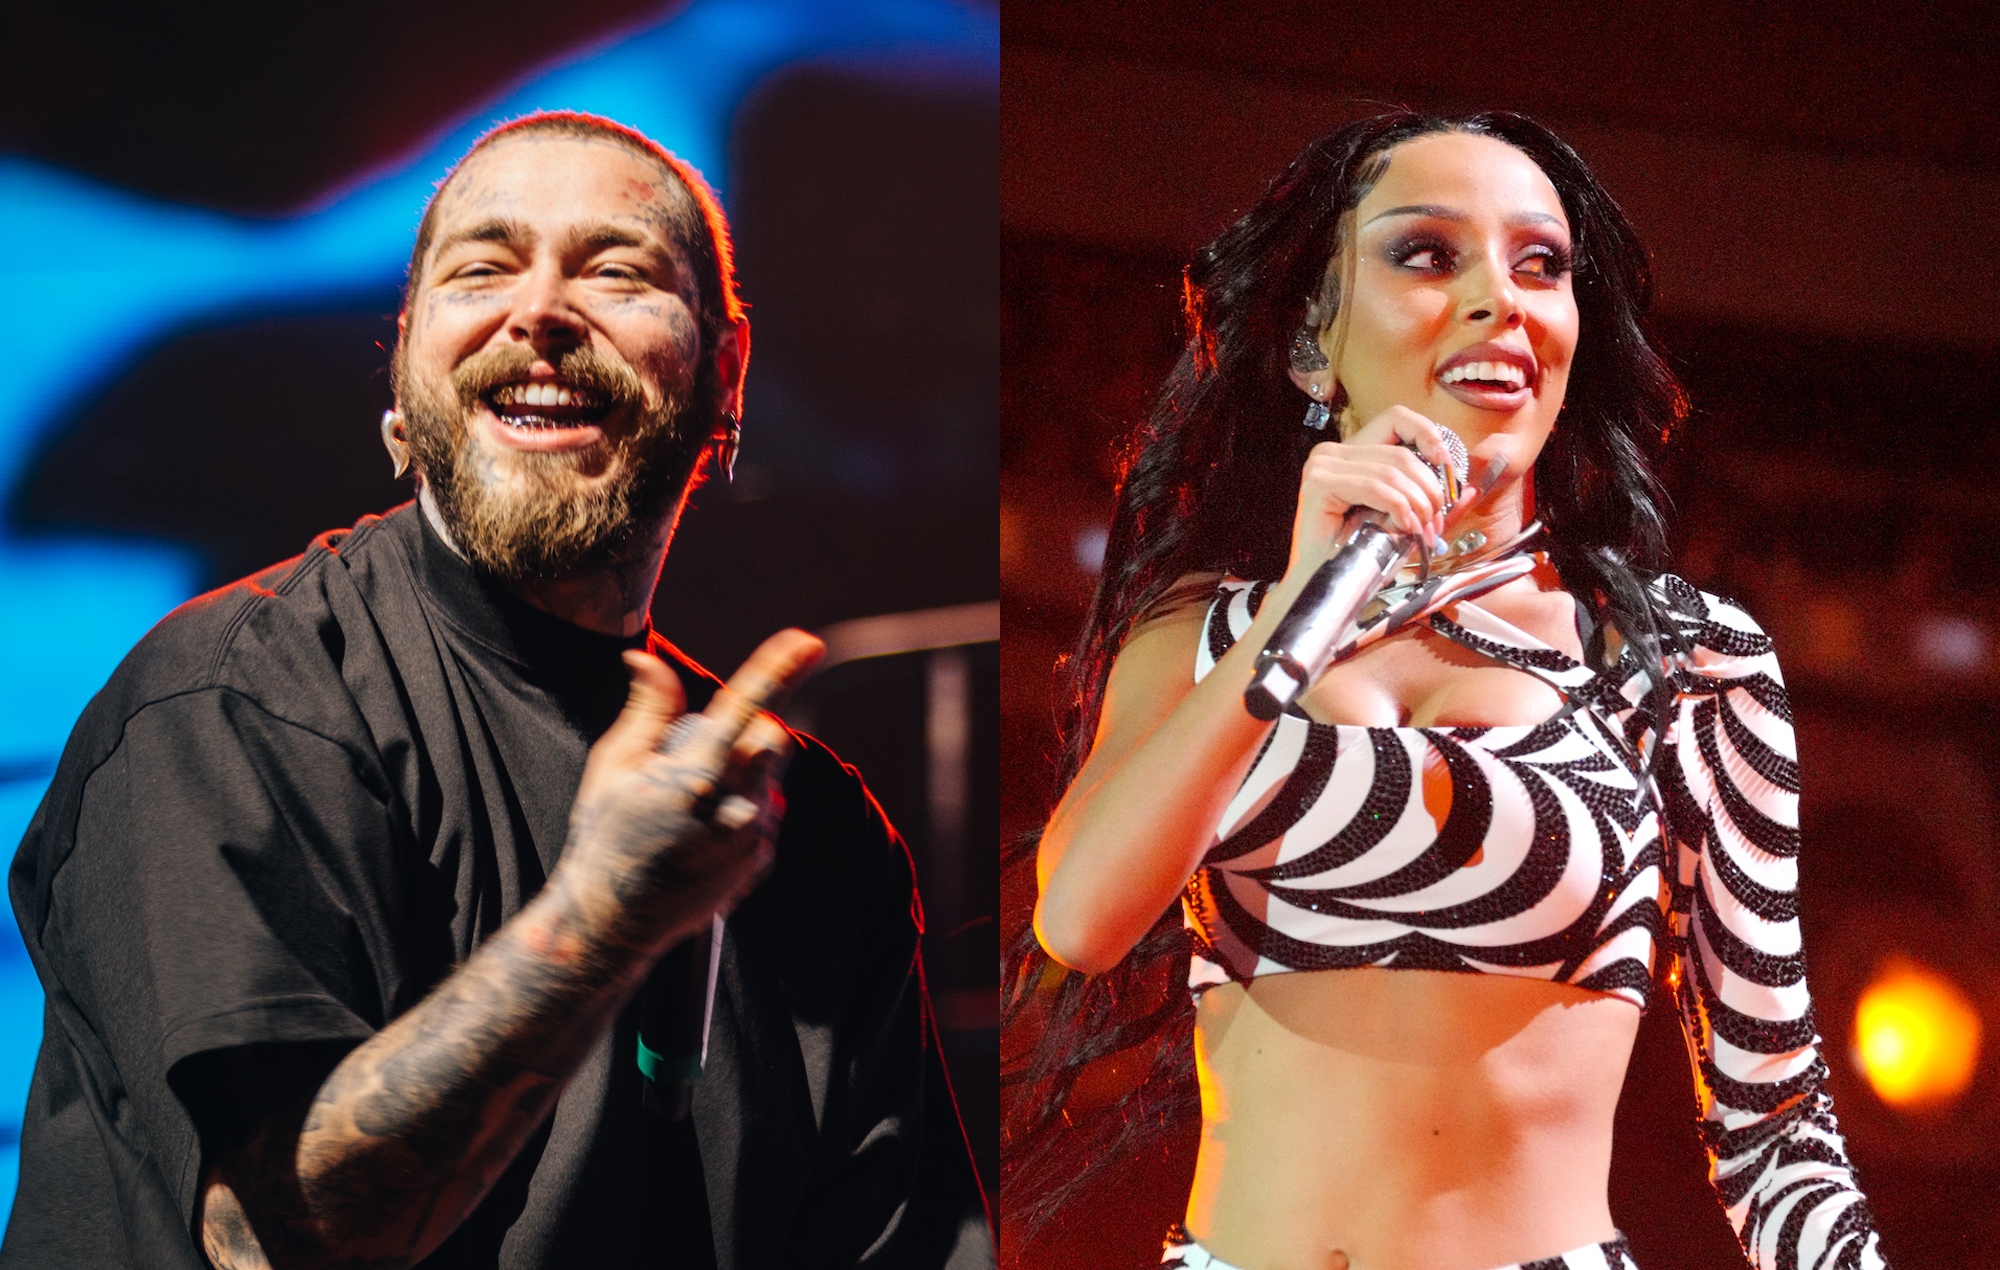 Post Malone shares clips of new collabs with Doja Cat and more